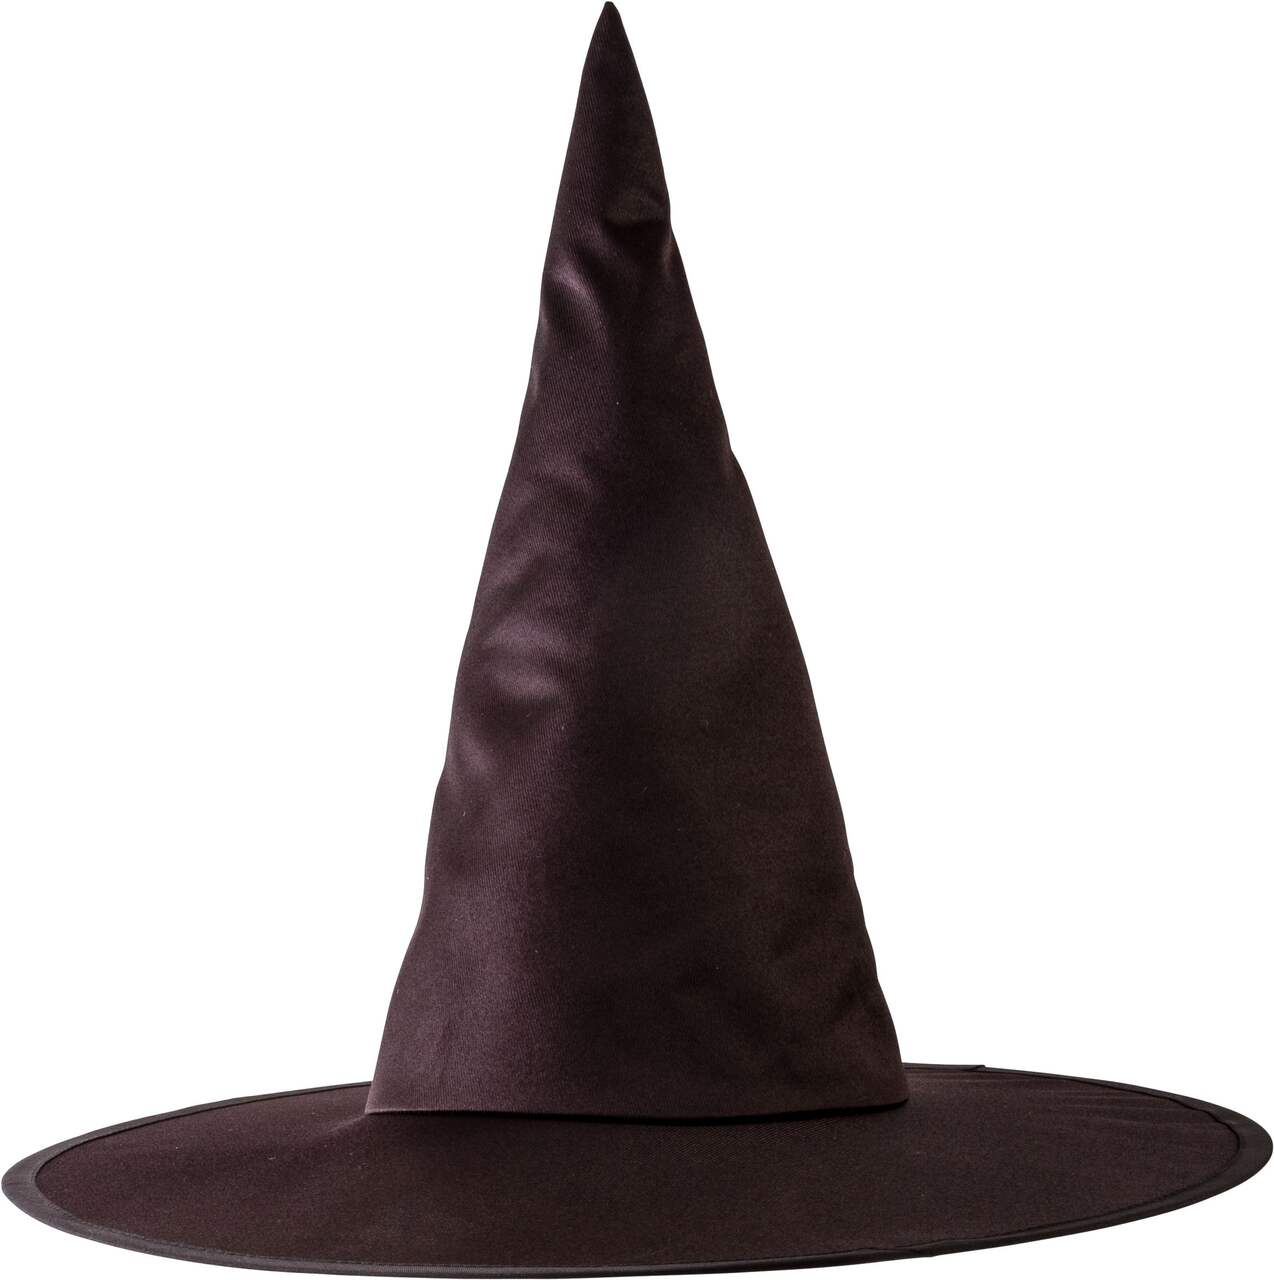 Witch Classic Pointy Hat, Black, One Size, Wearable Costume